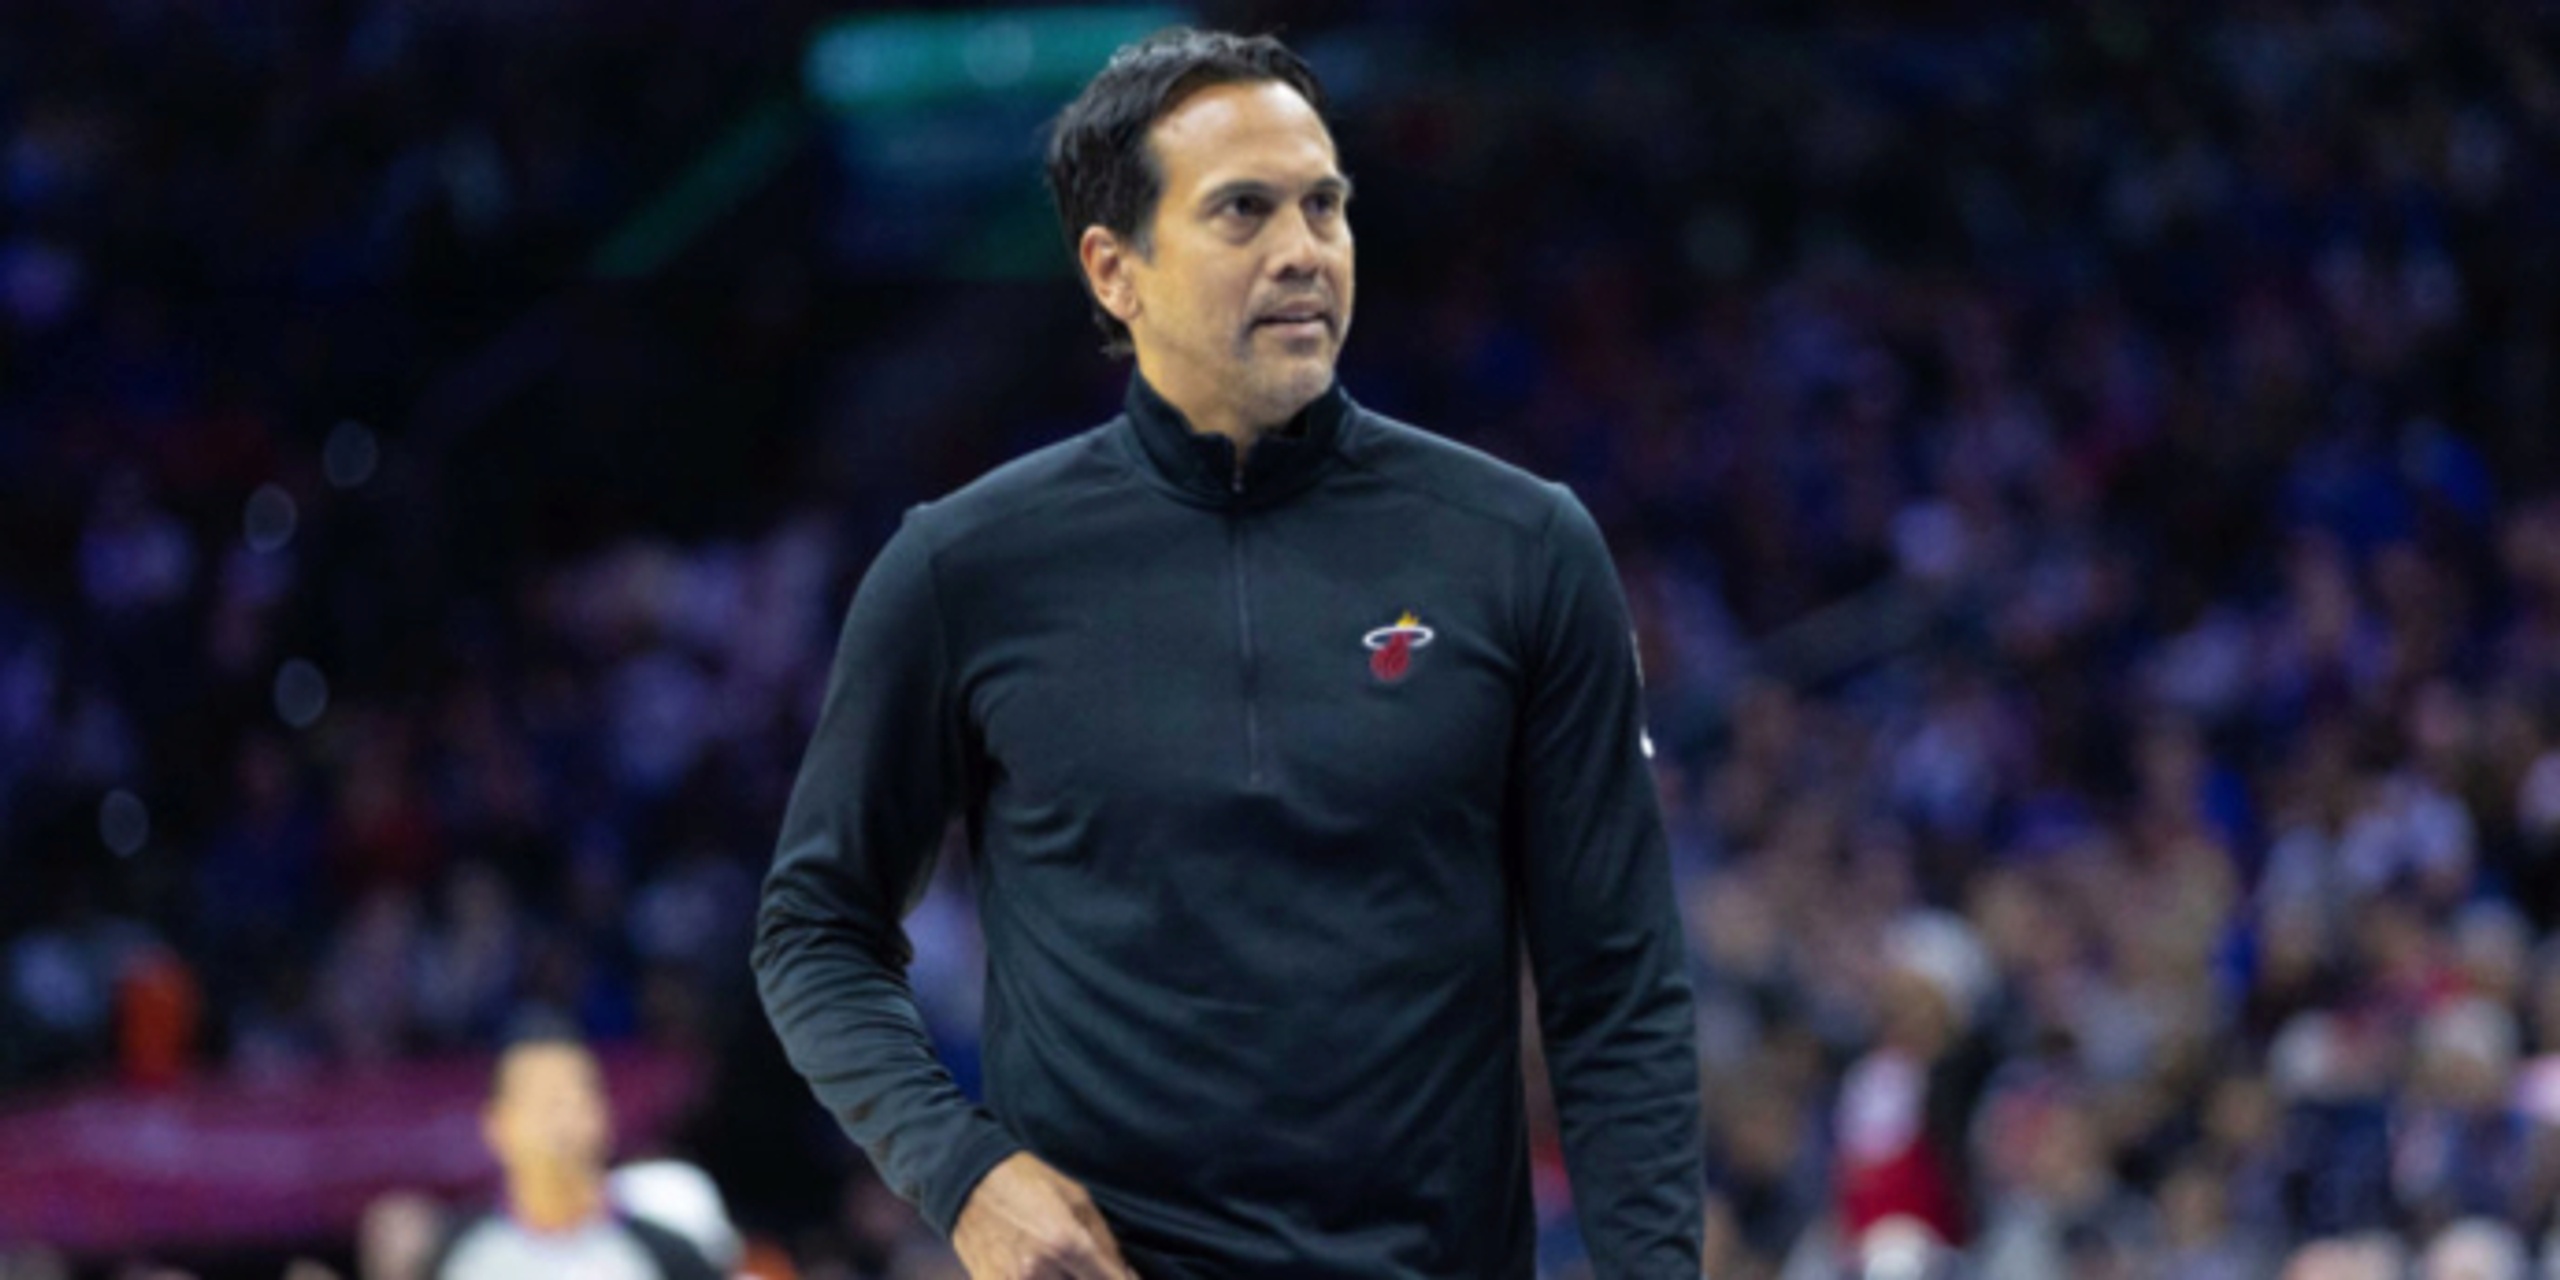 Erik Spoelstra to miss Miami's game vs. Brooklyn for personal reasons